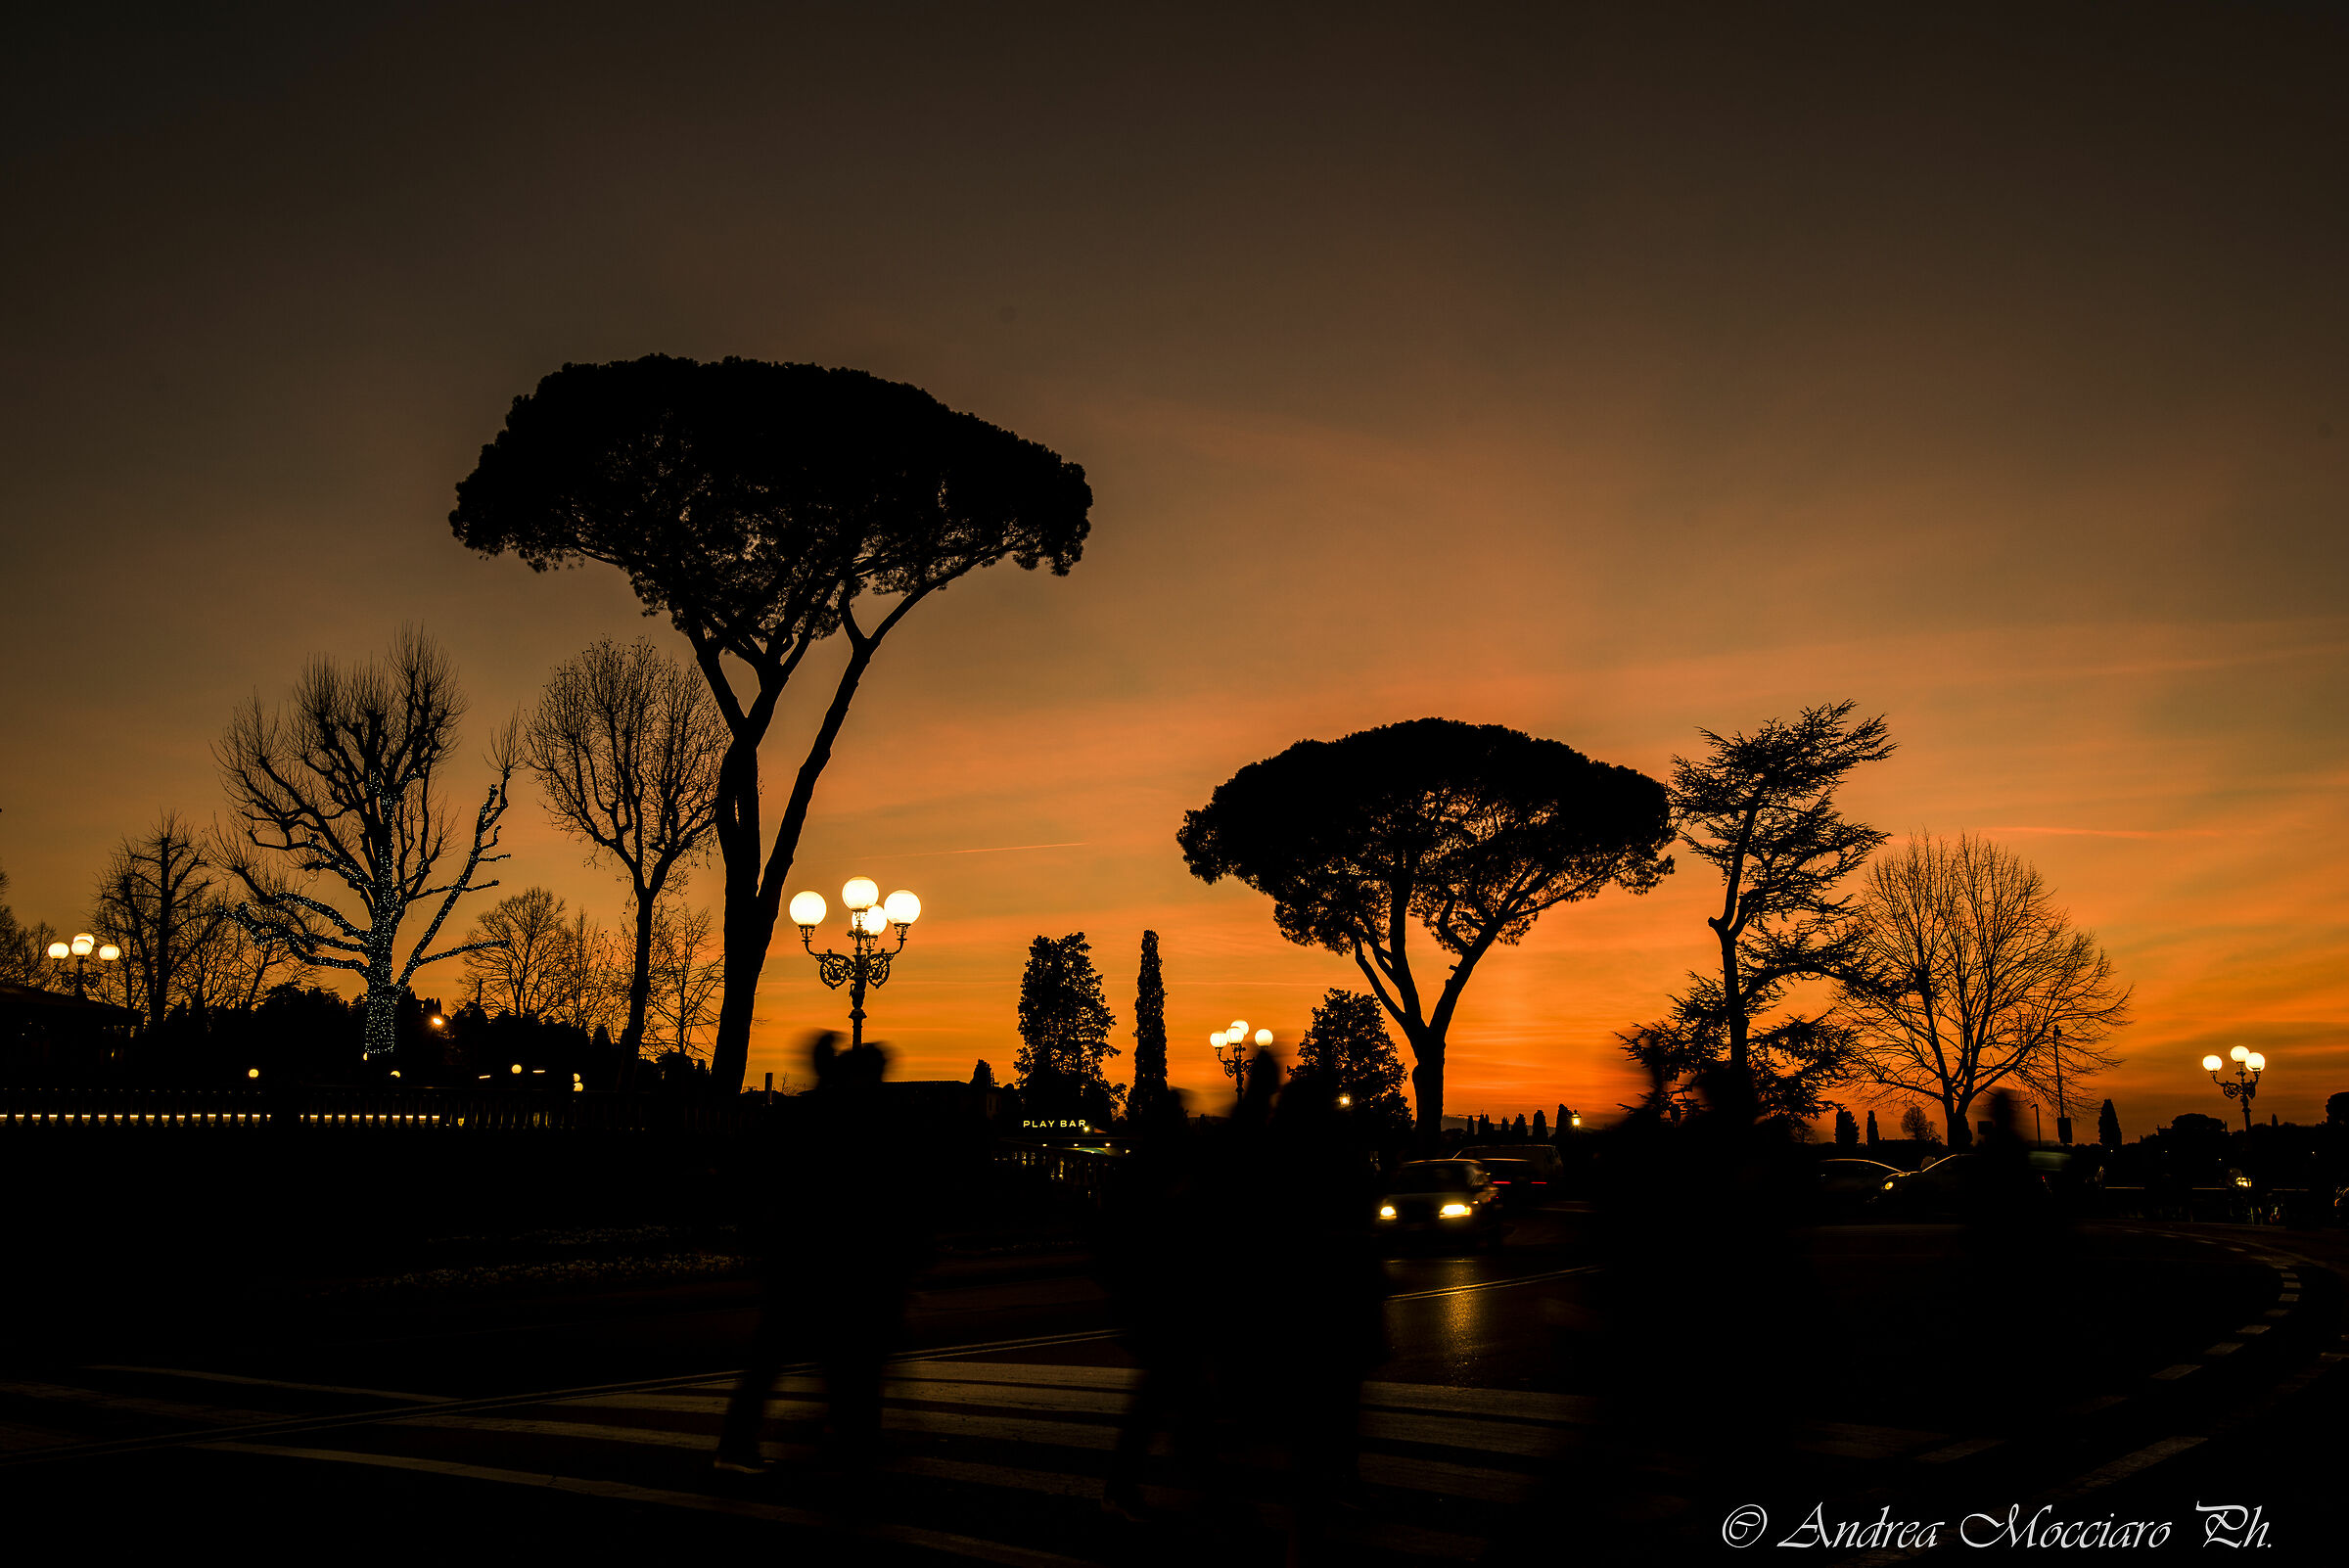 Florence - Piazzale Michelangelo at sunset...